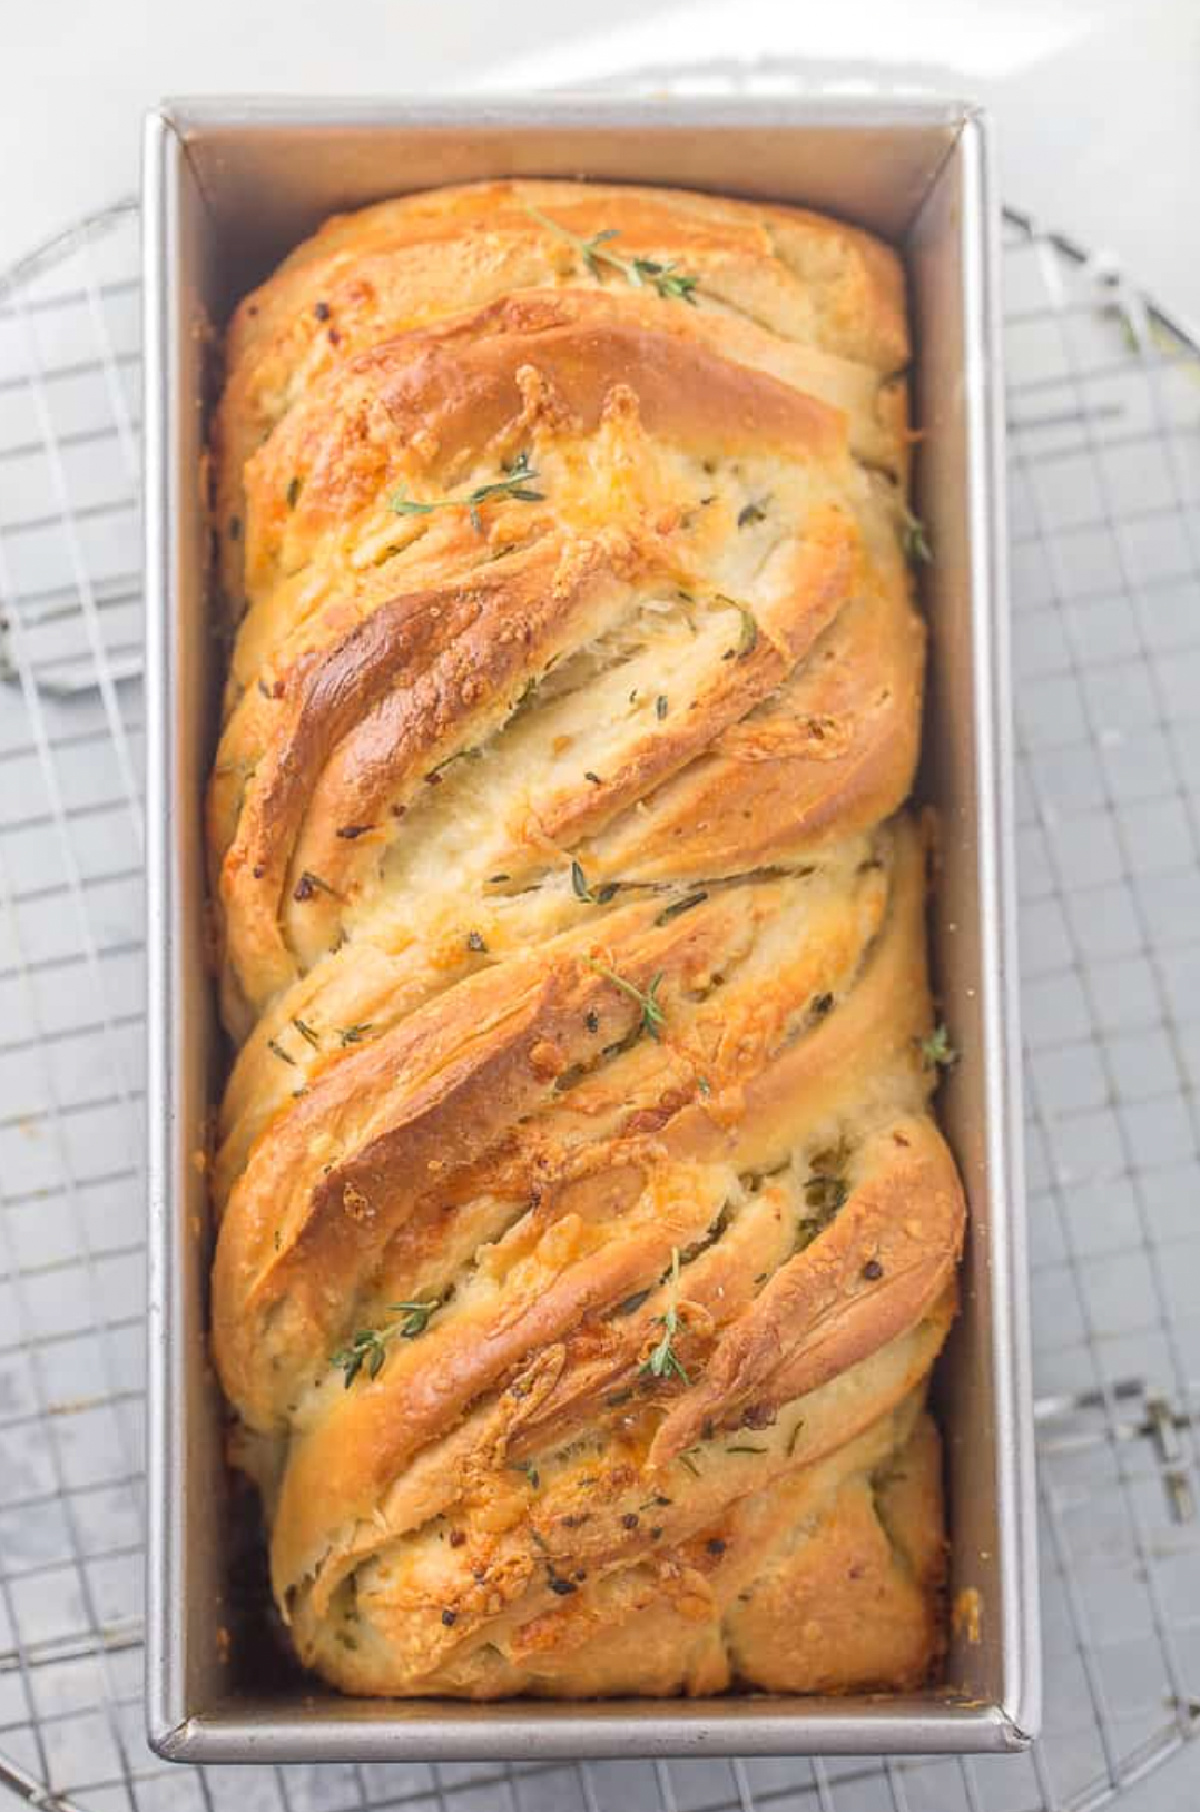 25 Bread Recipes You Should Try This Holiday Season